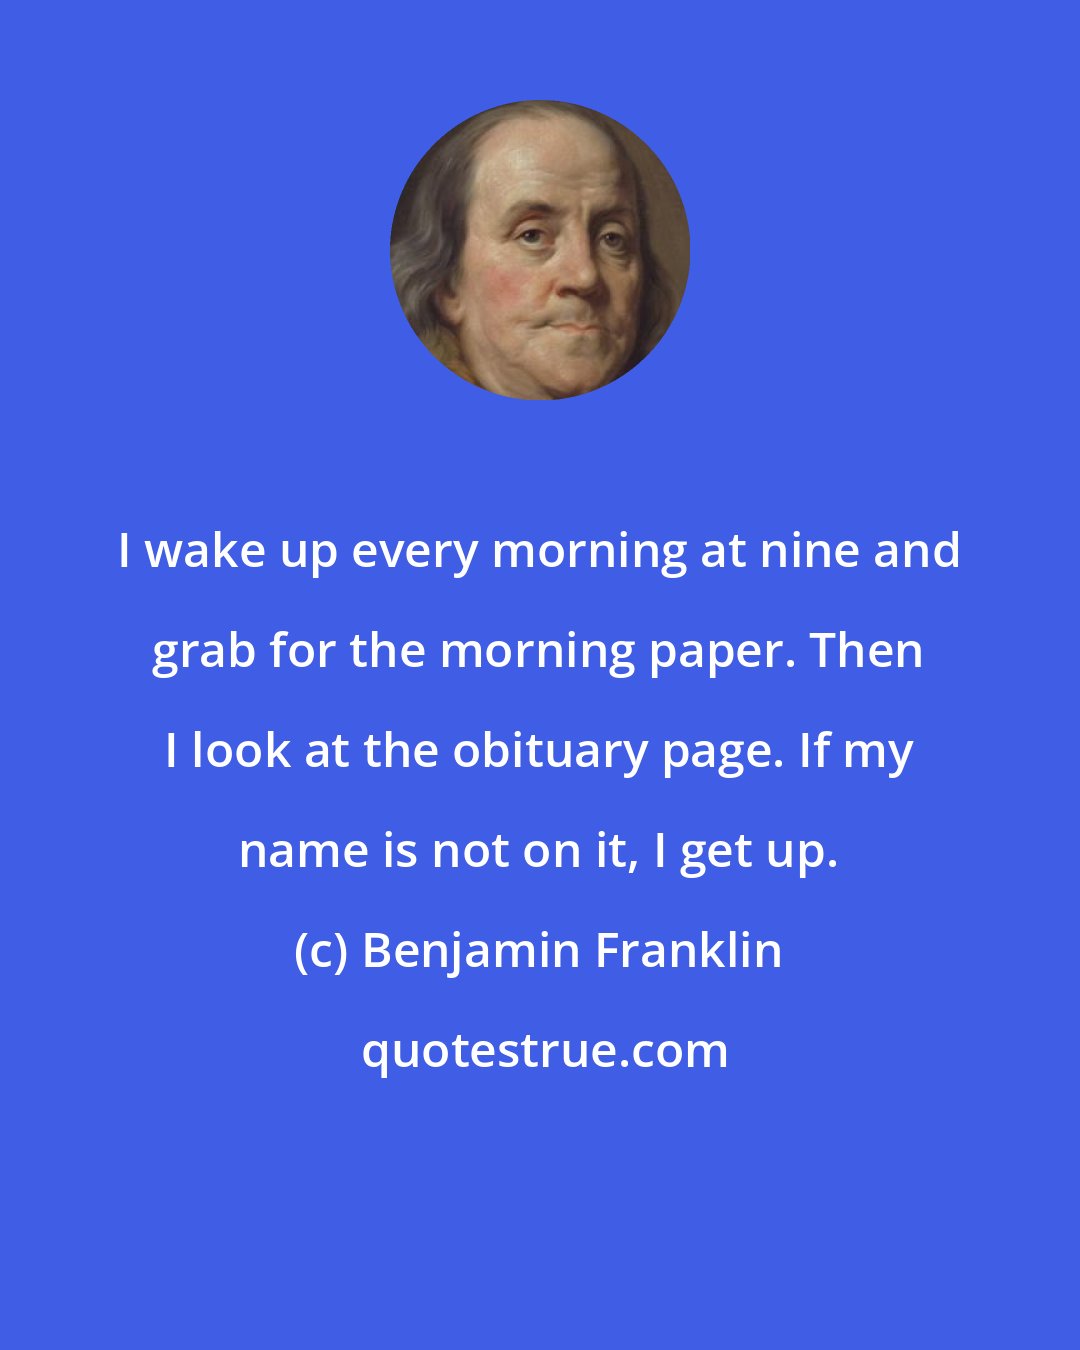 Benjamin Franklin: I wake up every morning at nine and grab for the morning paper. Then I look at the obituary page. If my name is not on it, I get up.